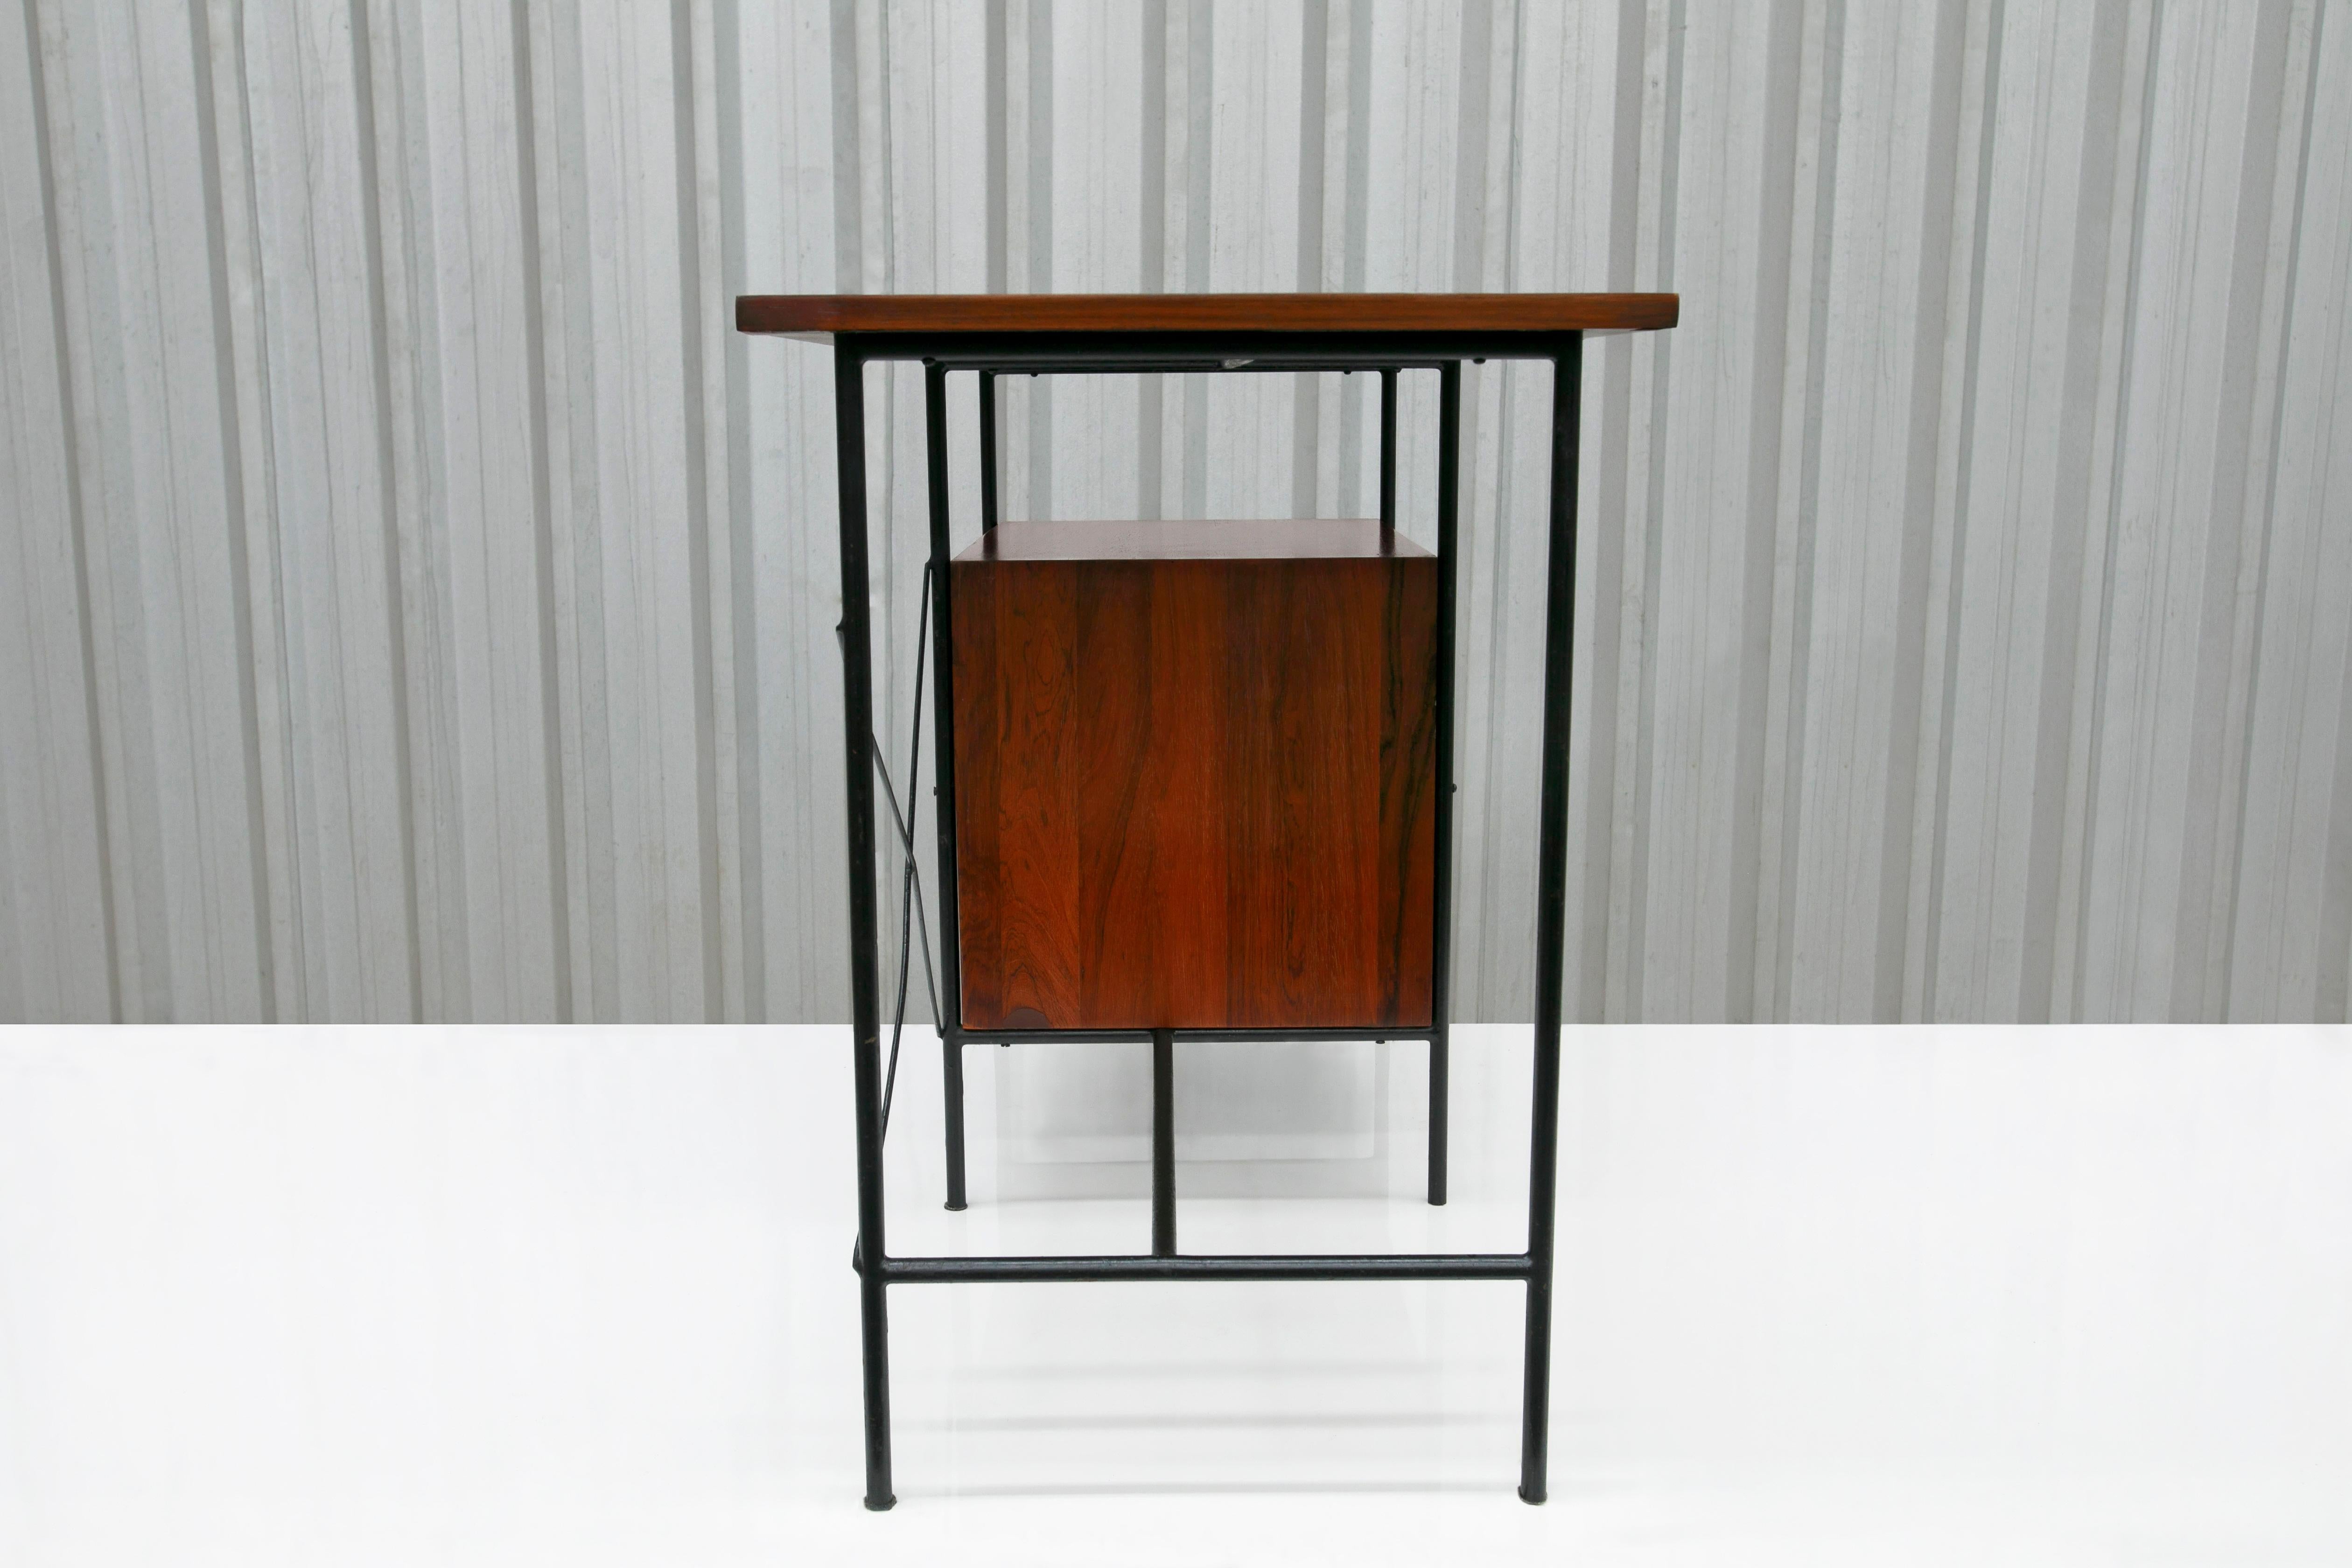 Hand-Painted Mid-Century Modern Desk with Armchair by Geraldo de Barros for Unilabor, Brazil For Sale